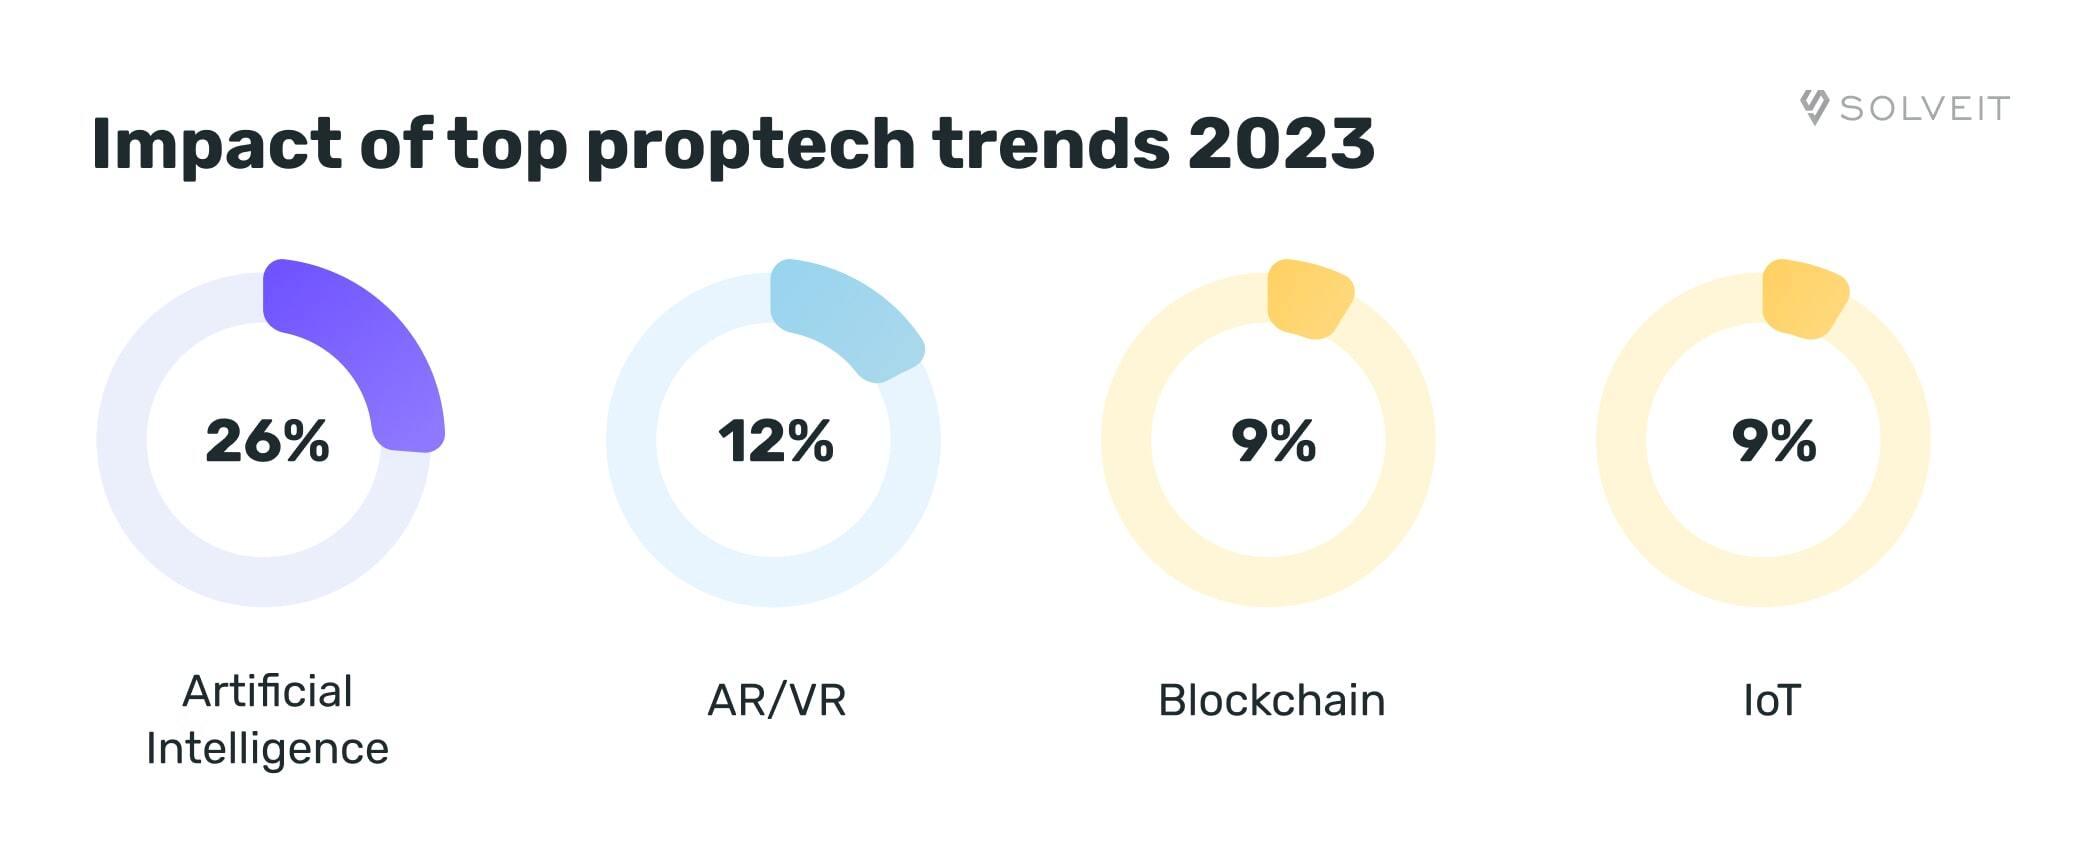 Impact of top proptech trends 2023 